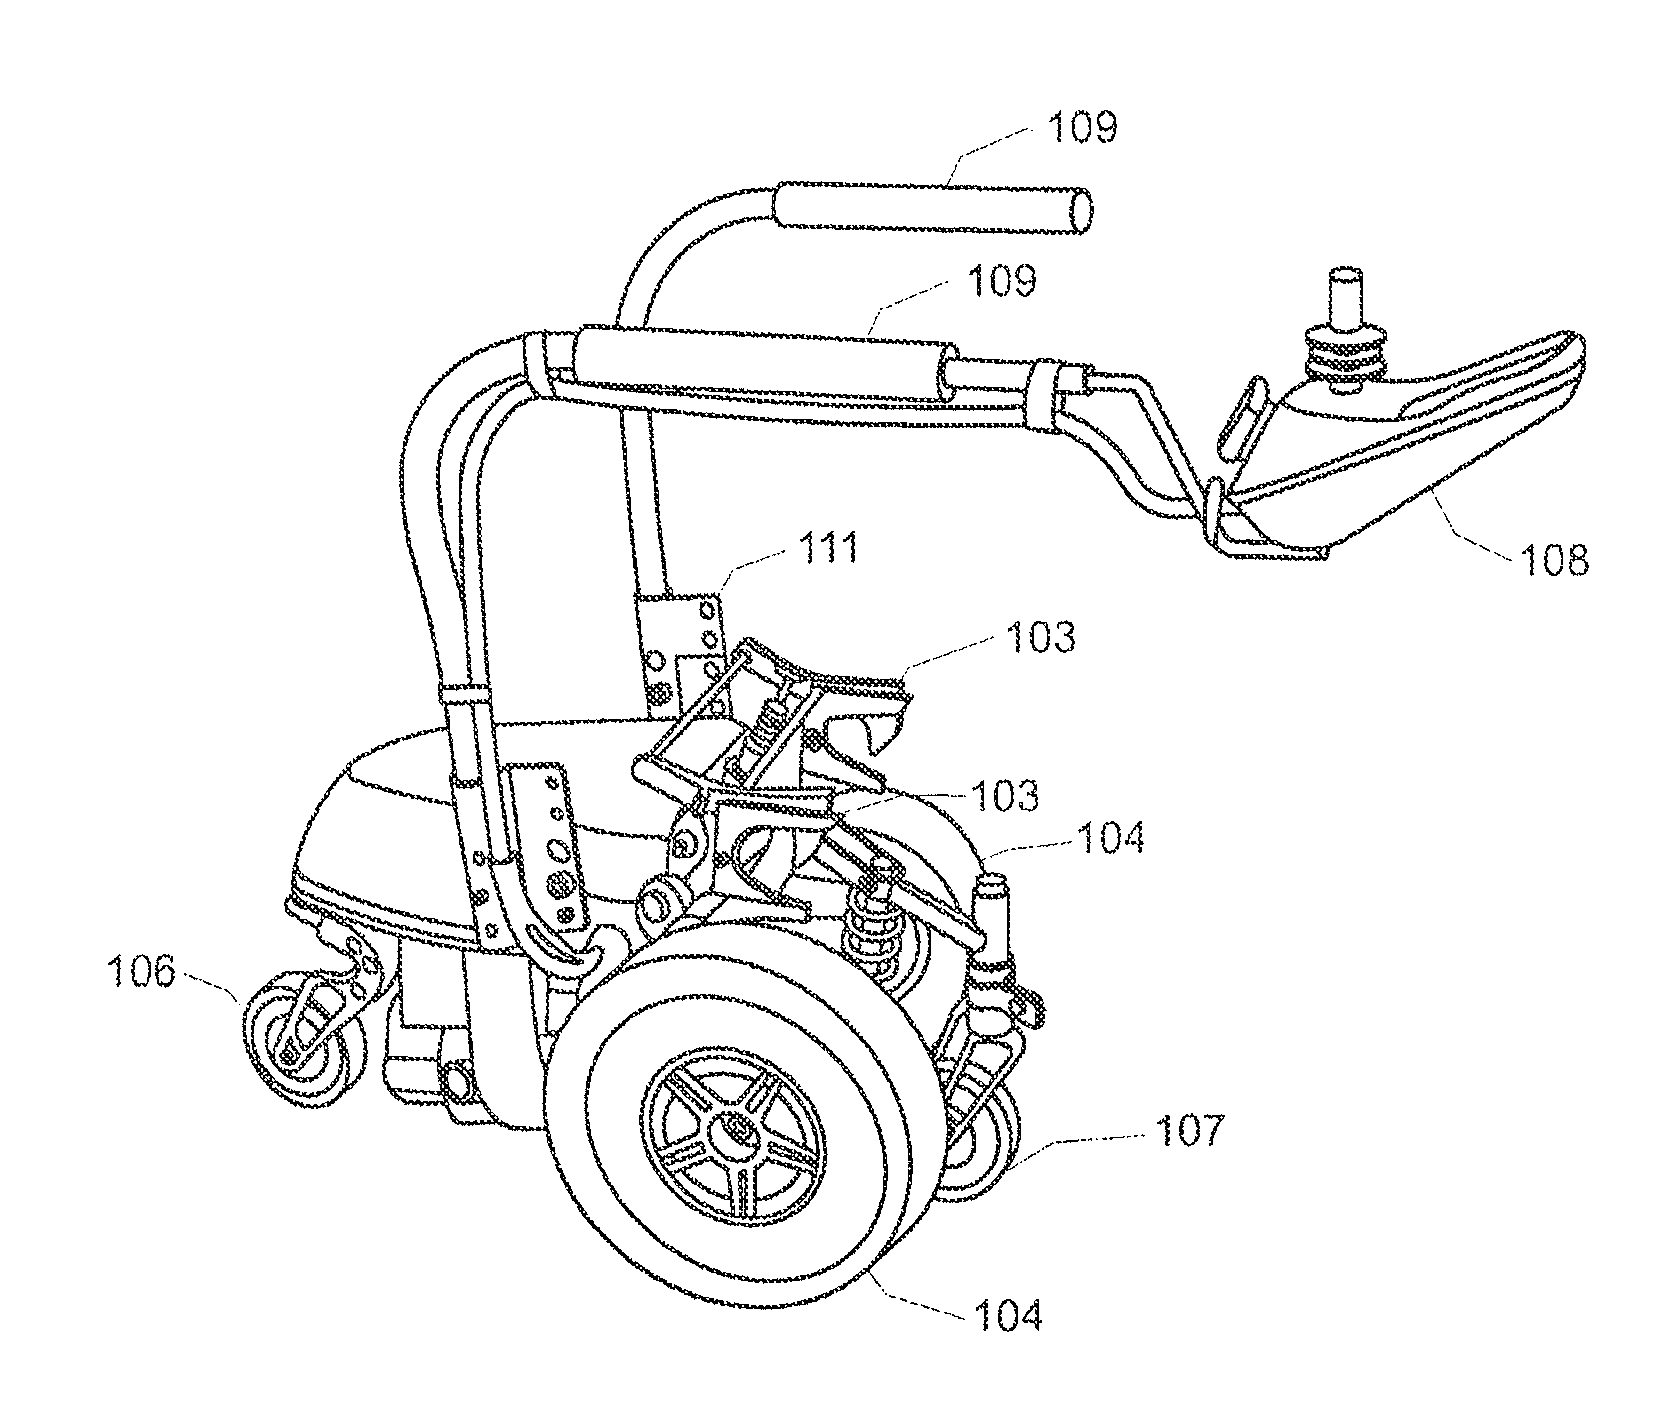 Power add-on device for manual wheelchair